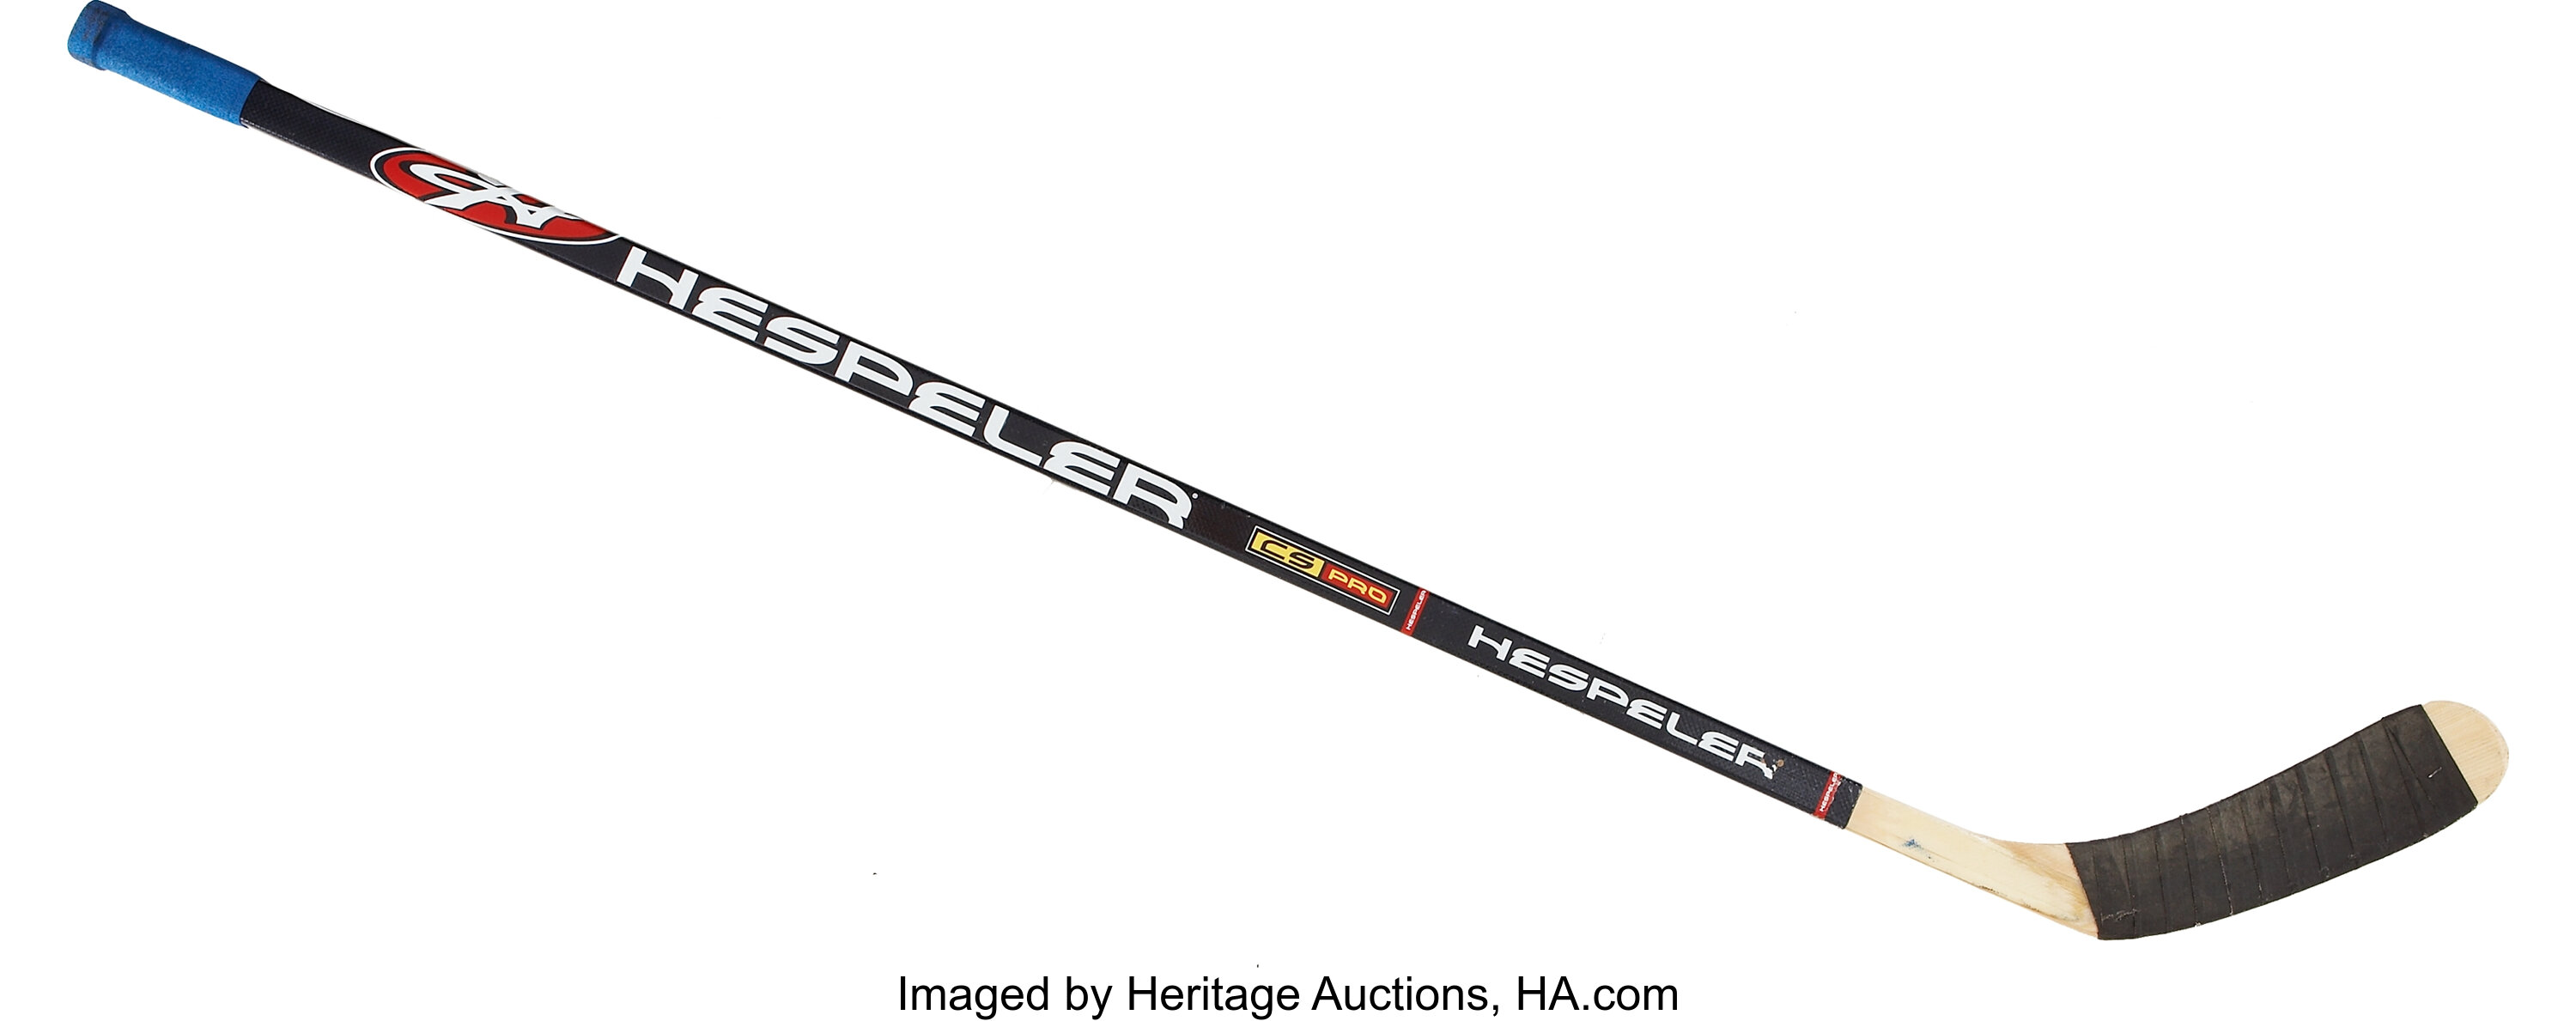 Wayne Gretzky Game Used Stick From Final Career Game